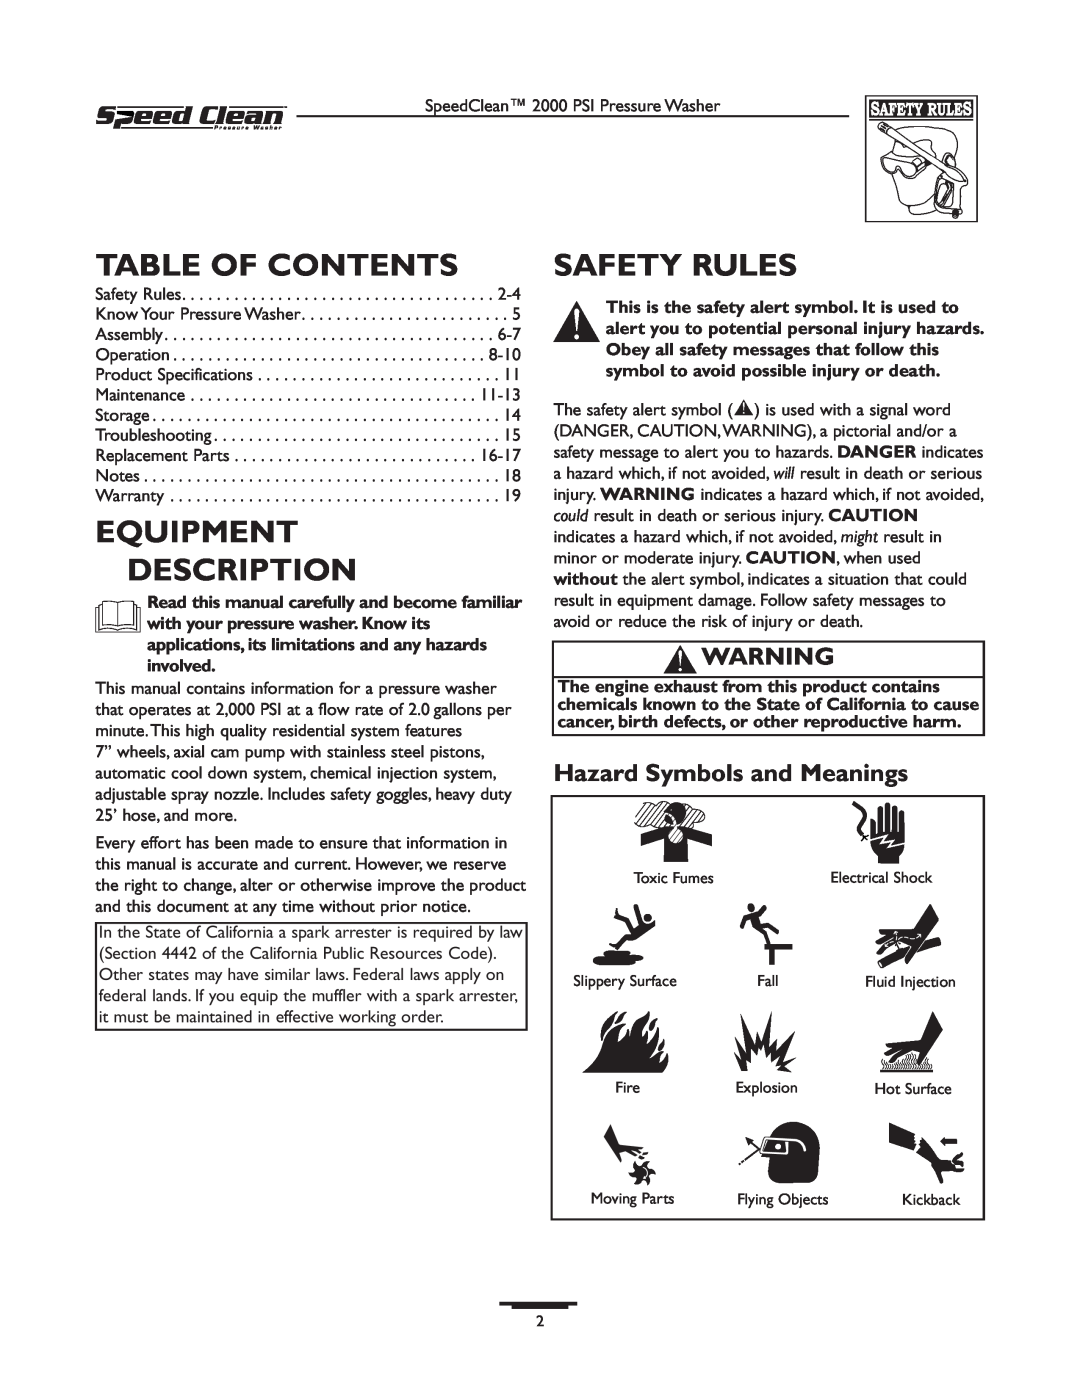 Briggs & Stratton 020211-0 owner manual Table Of Contents, Equipment Description, Safety Rules, Hazard Symbols and Meanings 